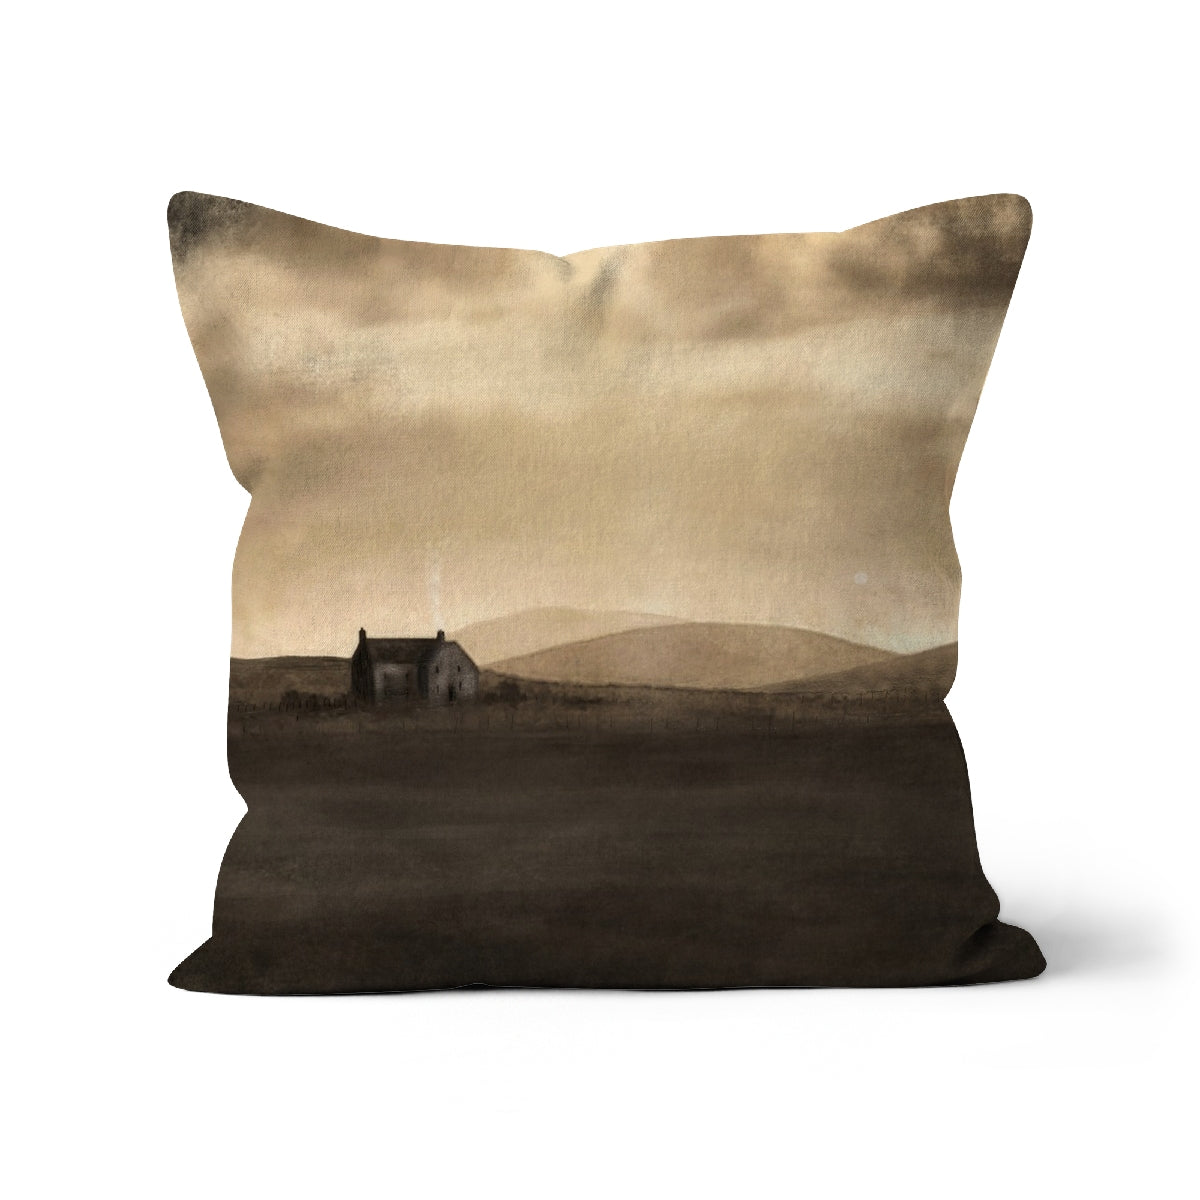 A Moonlit Croft Art Gifts Cushion-Cushions-Hebridean Islands Art Gallery-Faux Suede-24"x24"-Paintings, Prints, Homeware, Art Gifts From Scotland By Scottish Artist Kevin Hunter